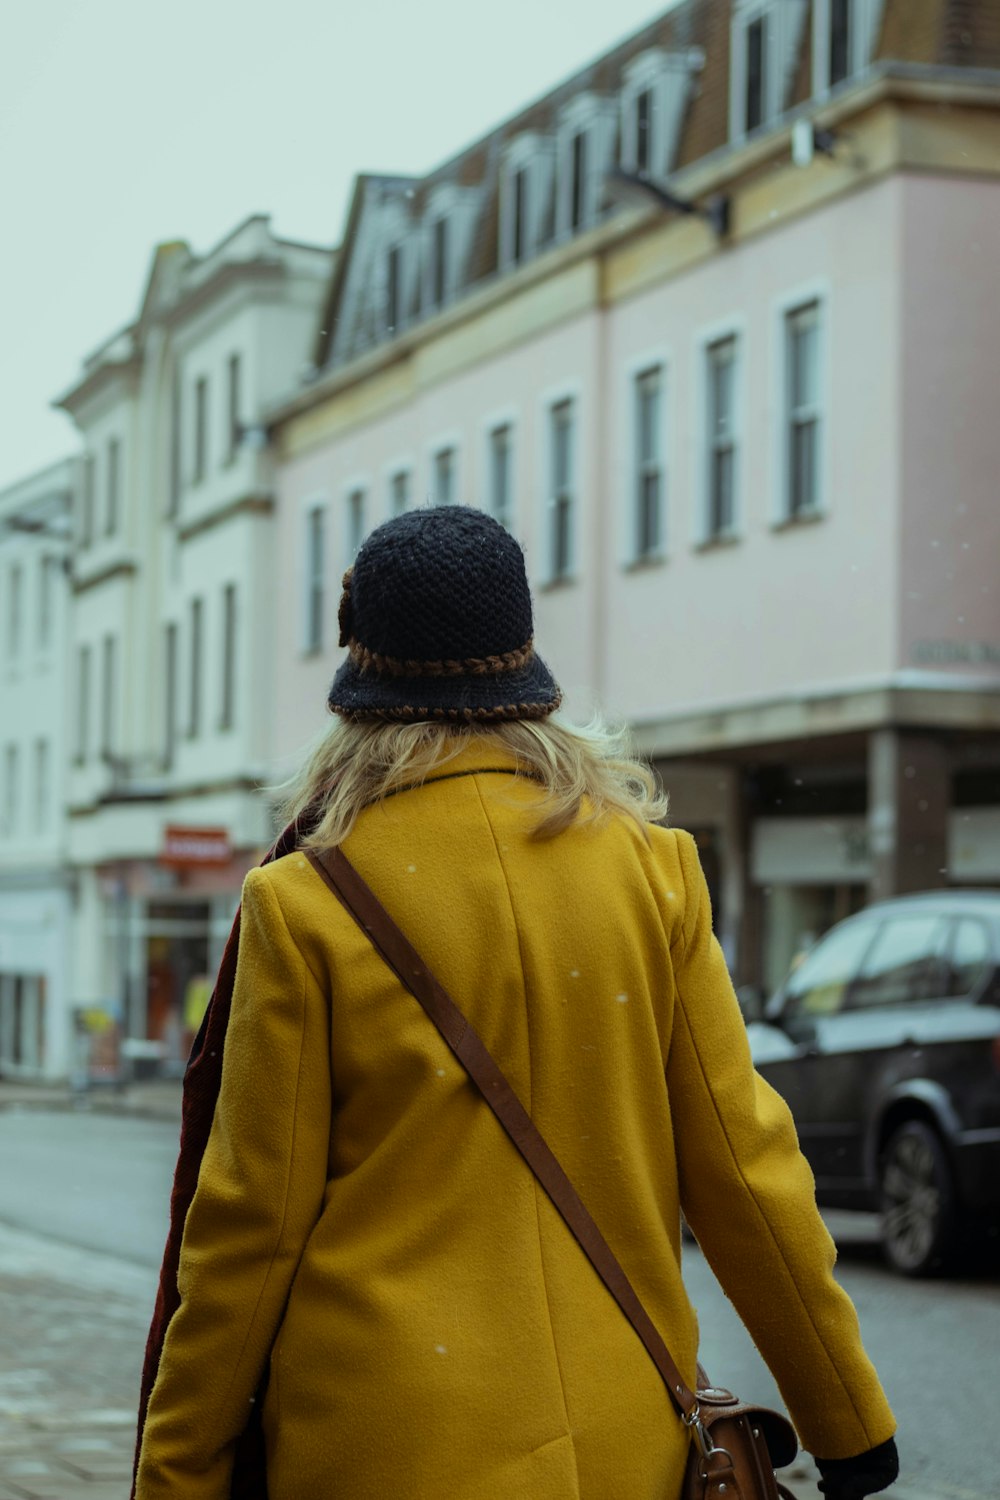 woman in yellow jacket and black knit cap walking on street during daytime